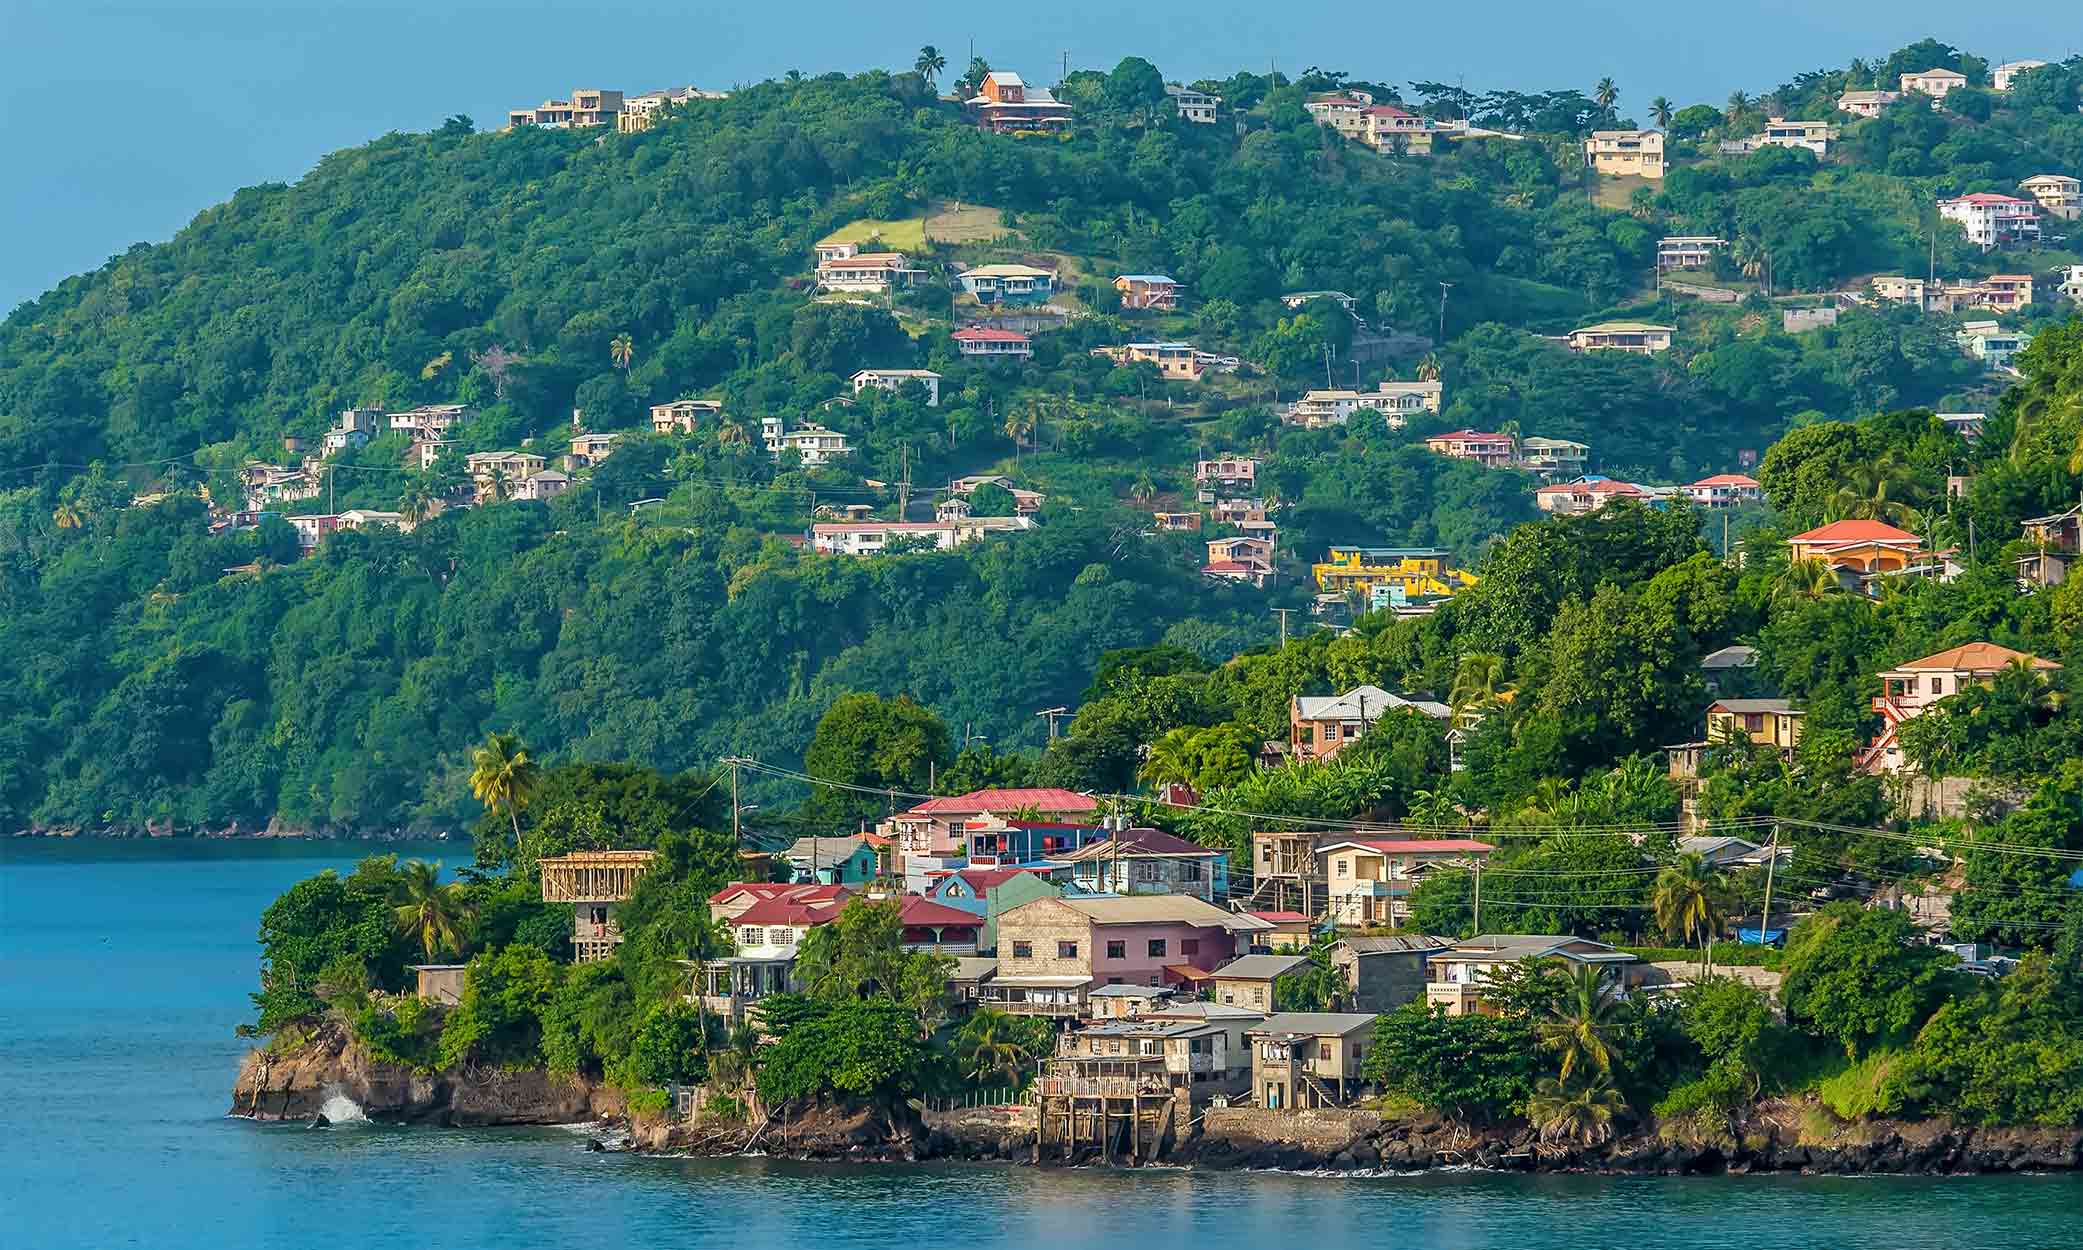 Is Grenada citizenship the investment migration programme you're looking for.